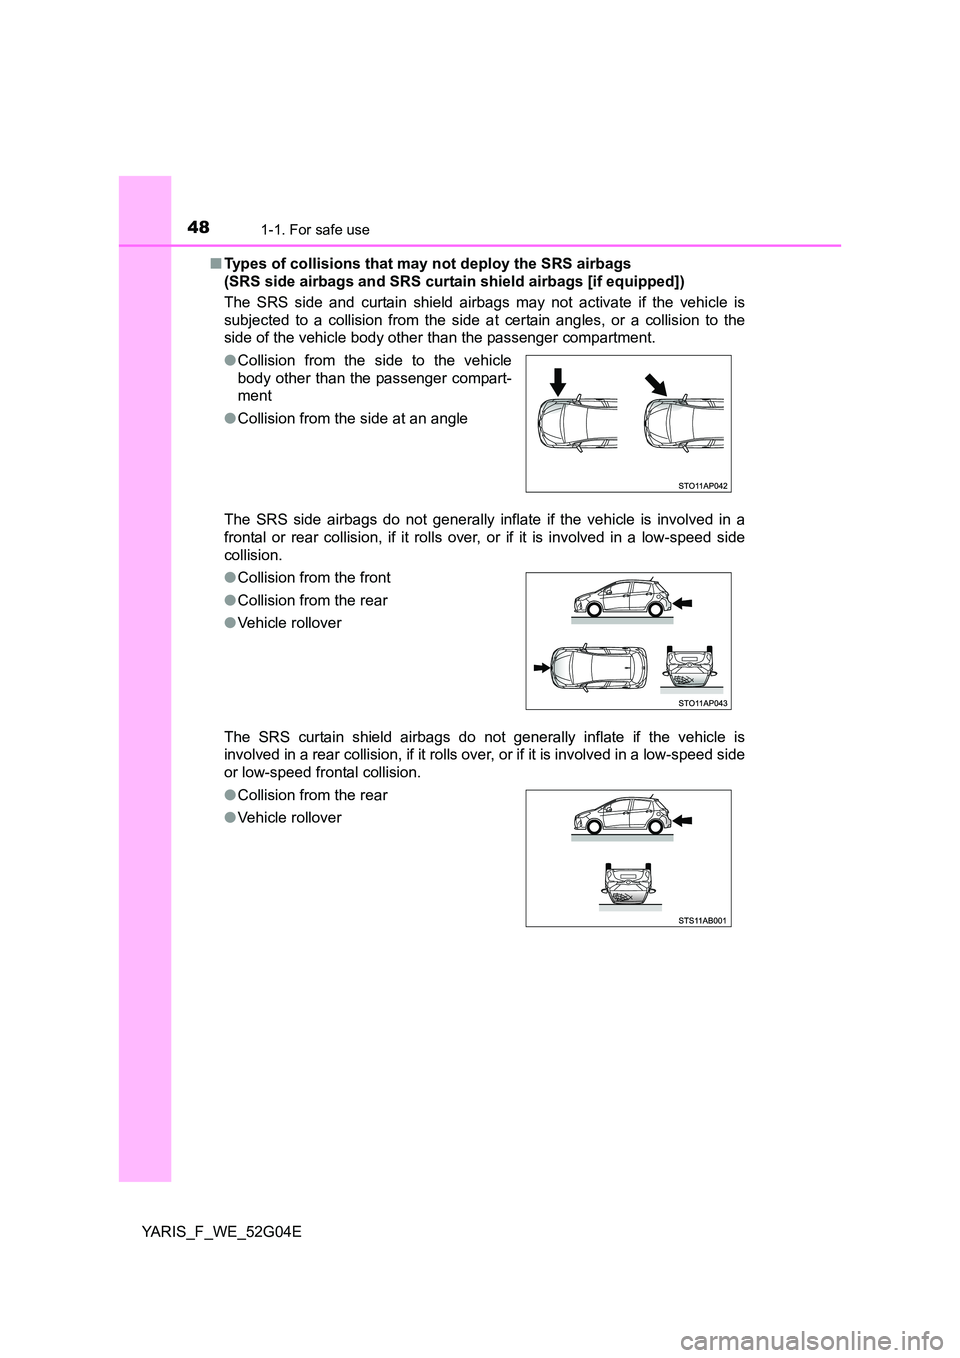 TOYOTA YARIS 2016 User Guide 481-1. For safe use
YARIS_F_WE_52G04E 
■ Types of collisions that may not deploy the SRS airbags  
(SRS side airbags and SRS curtain shield airbags [if equipped]) 
The SRS side and curtain shield ai